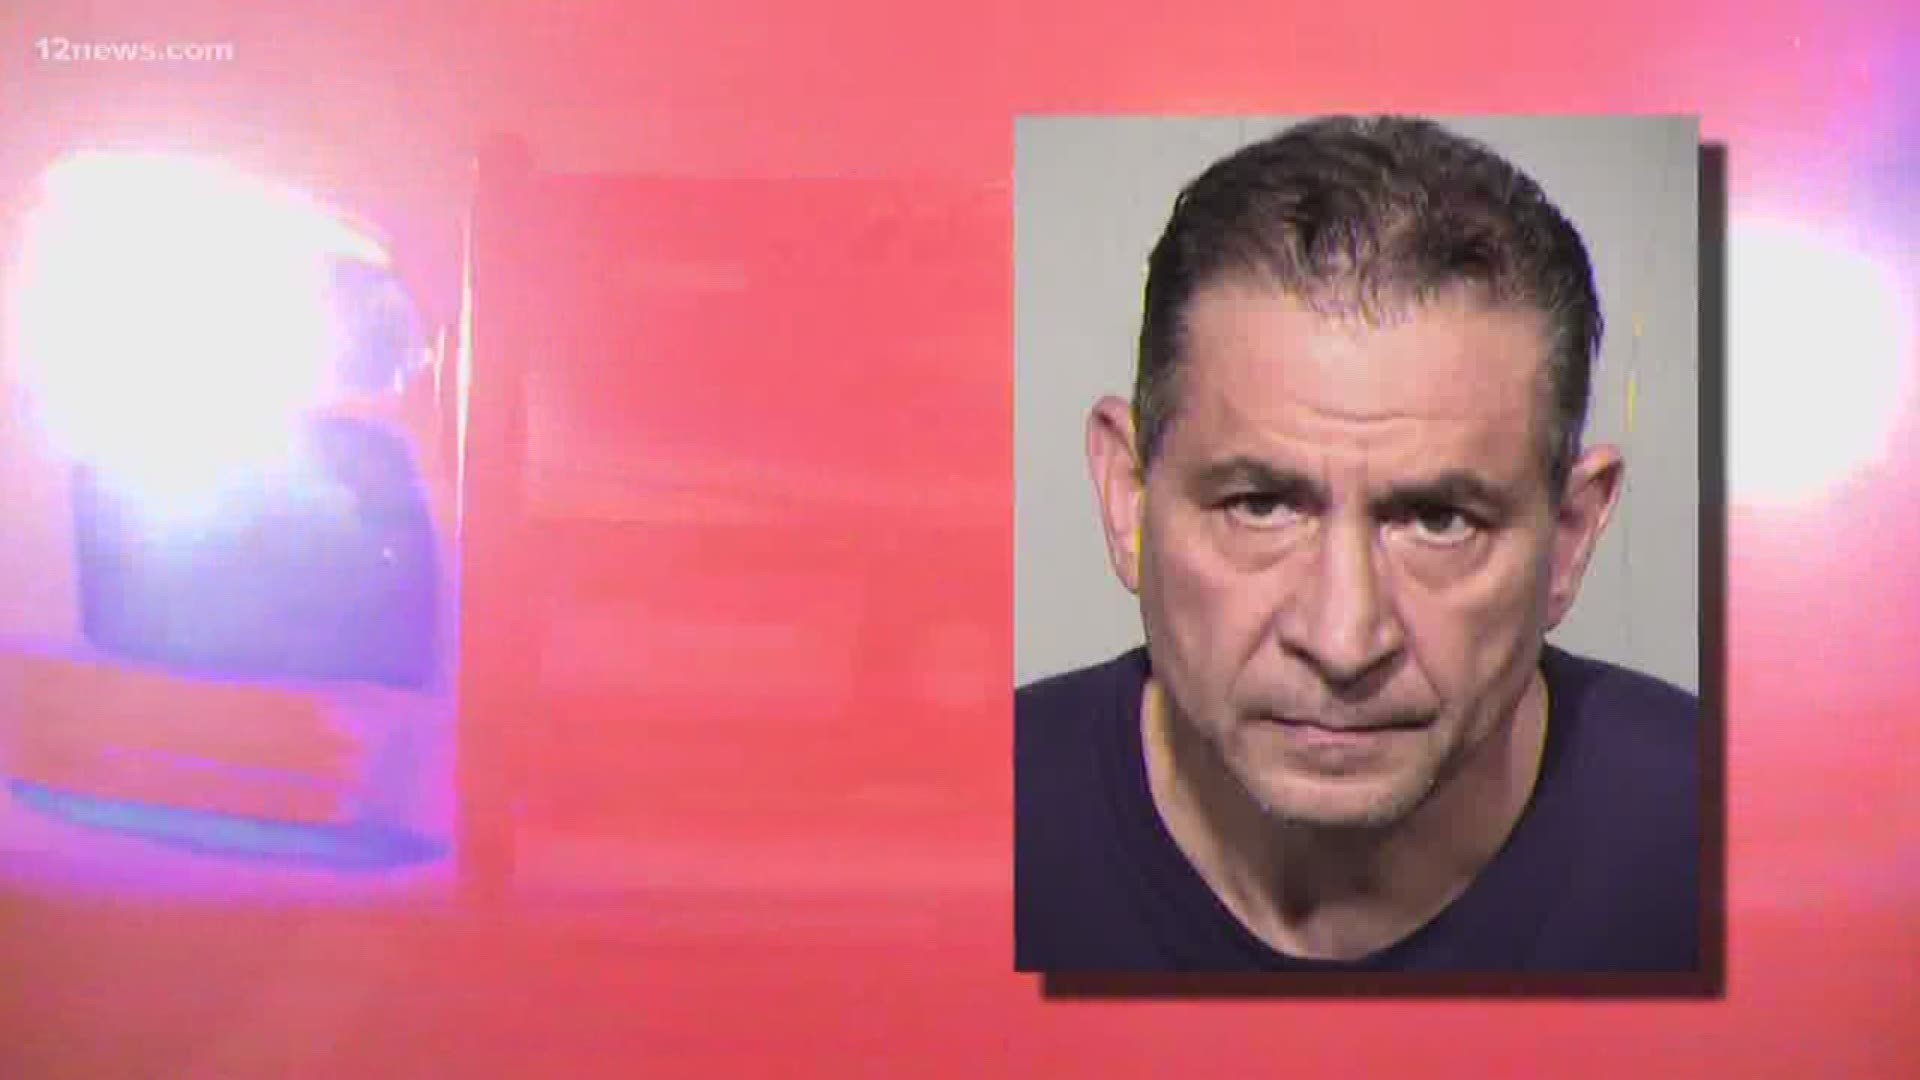 55-year-old Michael James Delillo has been arrested for allegedly sexually assaulting a 16-year-old girl in a parking garage at Paradise Valley Mall. Neighbors of Delillo say he barricaded himself inside his home when police showed up to arrest him. He has been taken into custody.